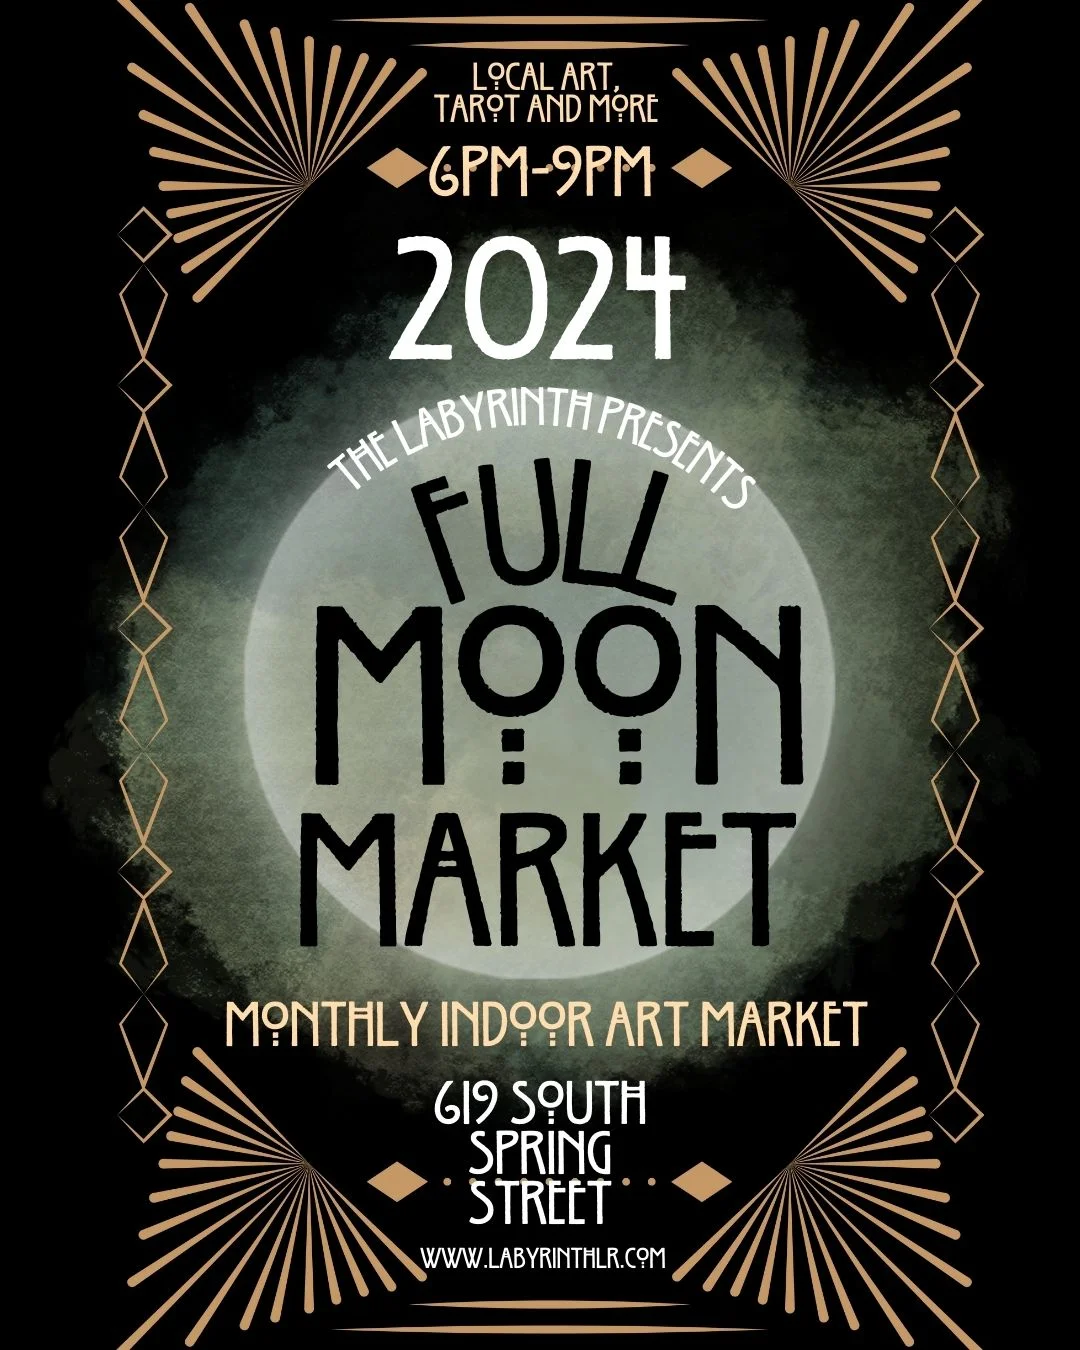 Flyer for the 2024 Full Moon Market at The Labyrinth. The text reads, &ldquo;The Labyrinth presents Full Moon Market. Local art, tarot, and more. Monthly indoor art market. At The Labyrinth, 619 South Spring Street, Little Rock, AR. Website at labyrinthlr.com.&rdquo;